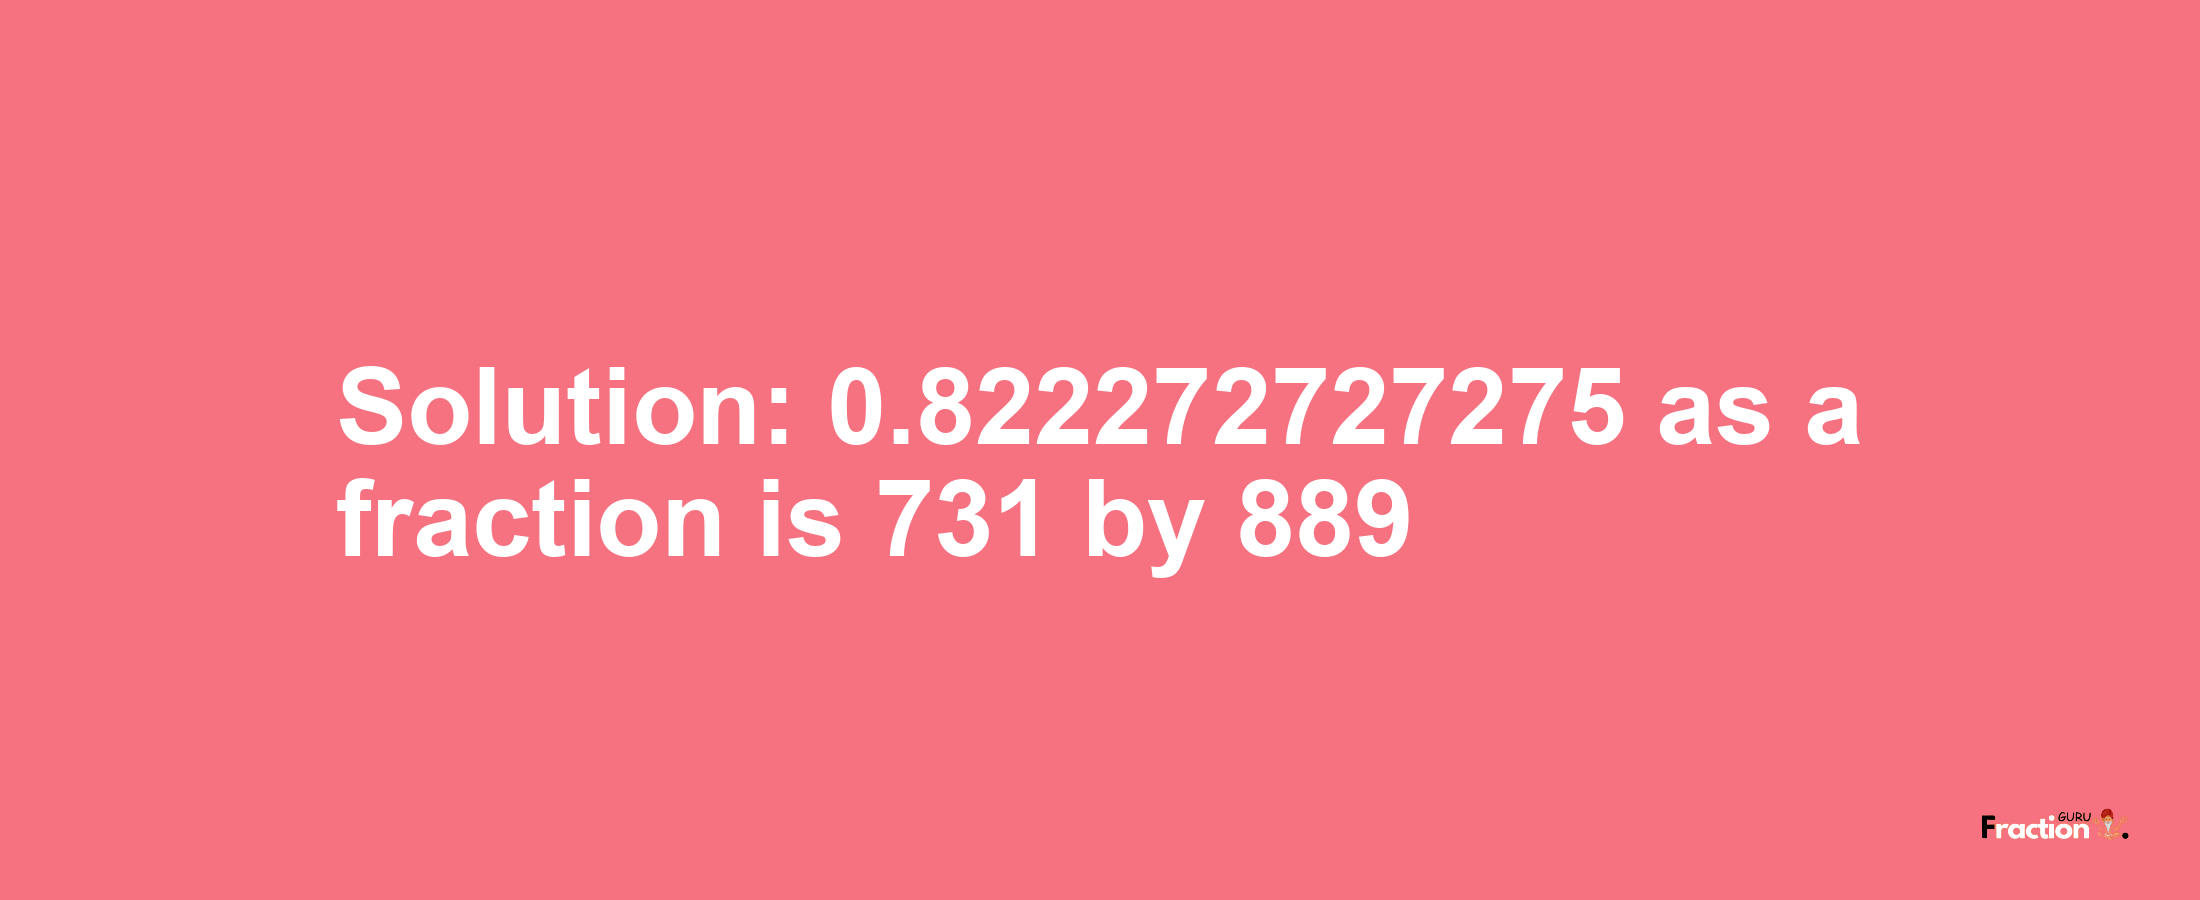 Solution:0.822272727275 as a fraction is 731/889